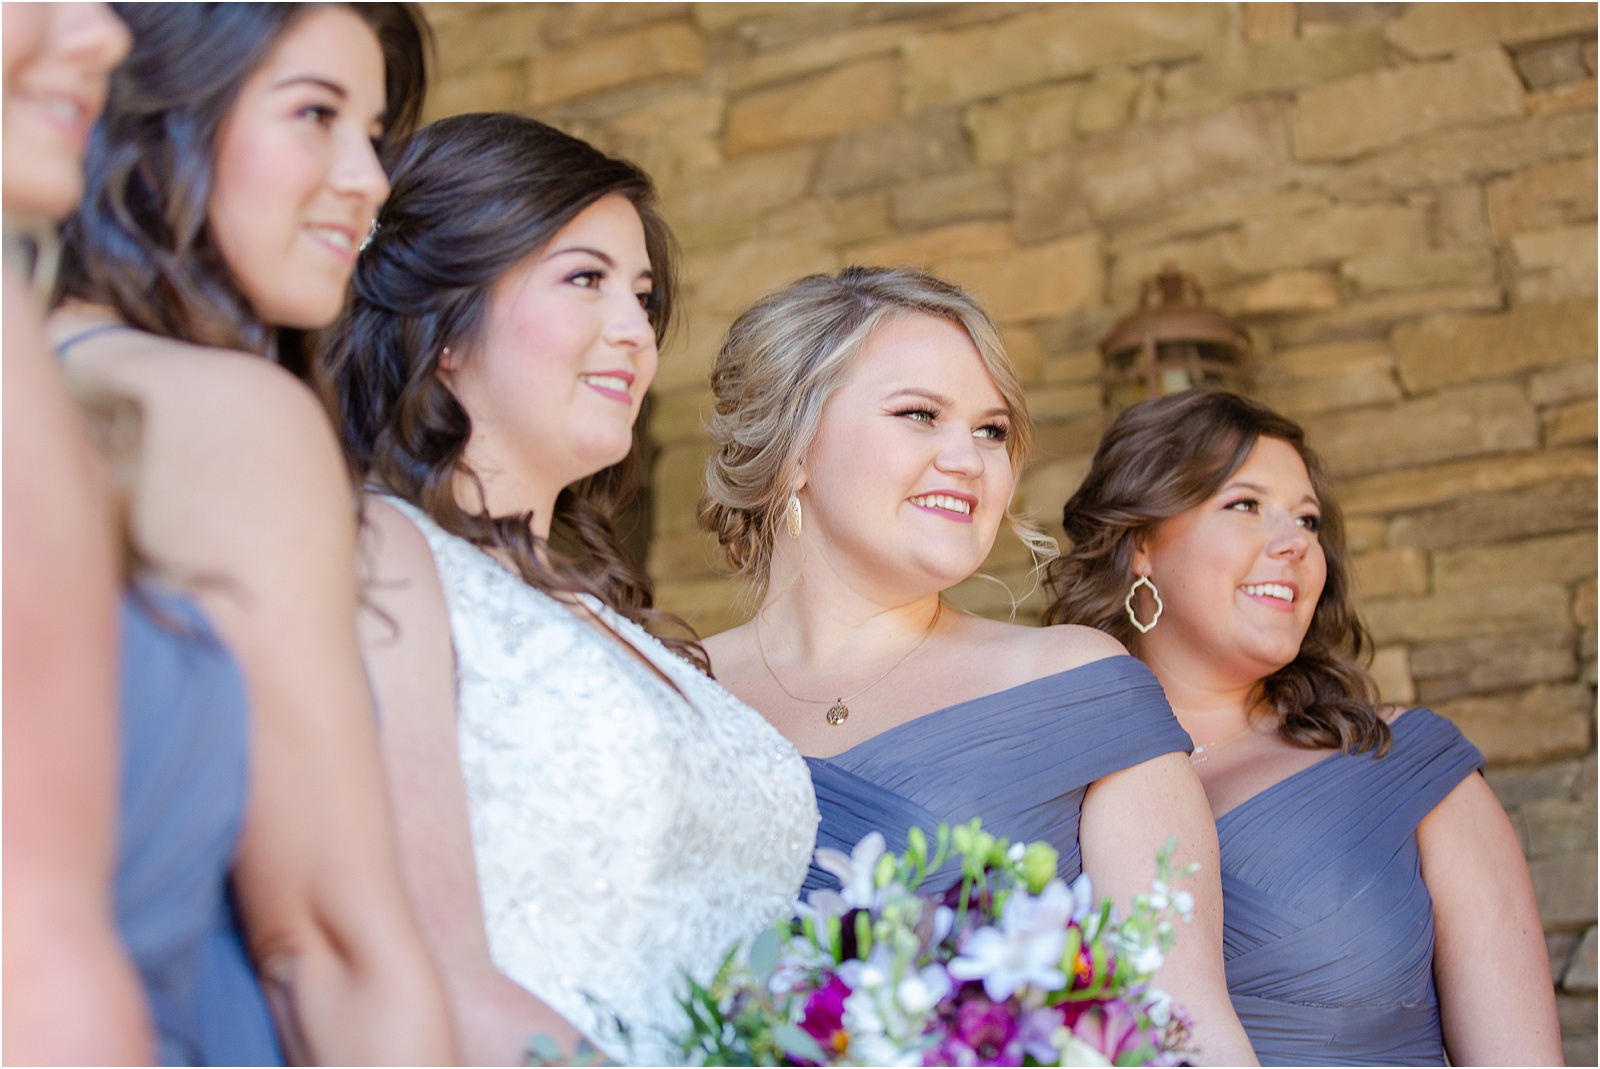 Bride and friends pose for wedding pictures